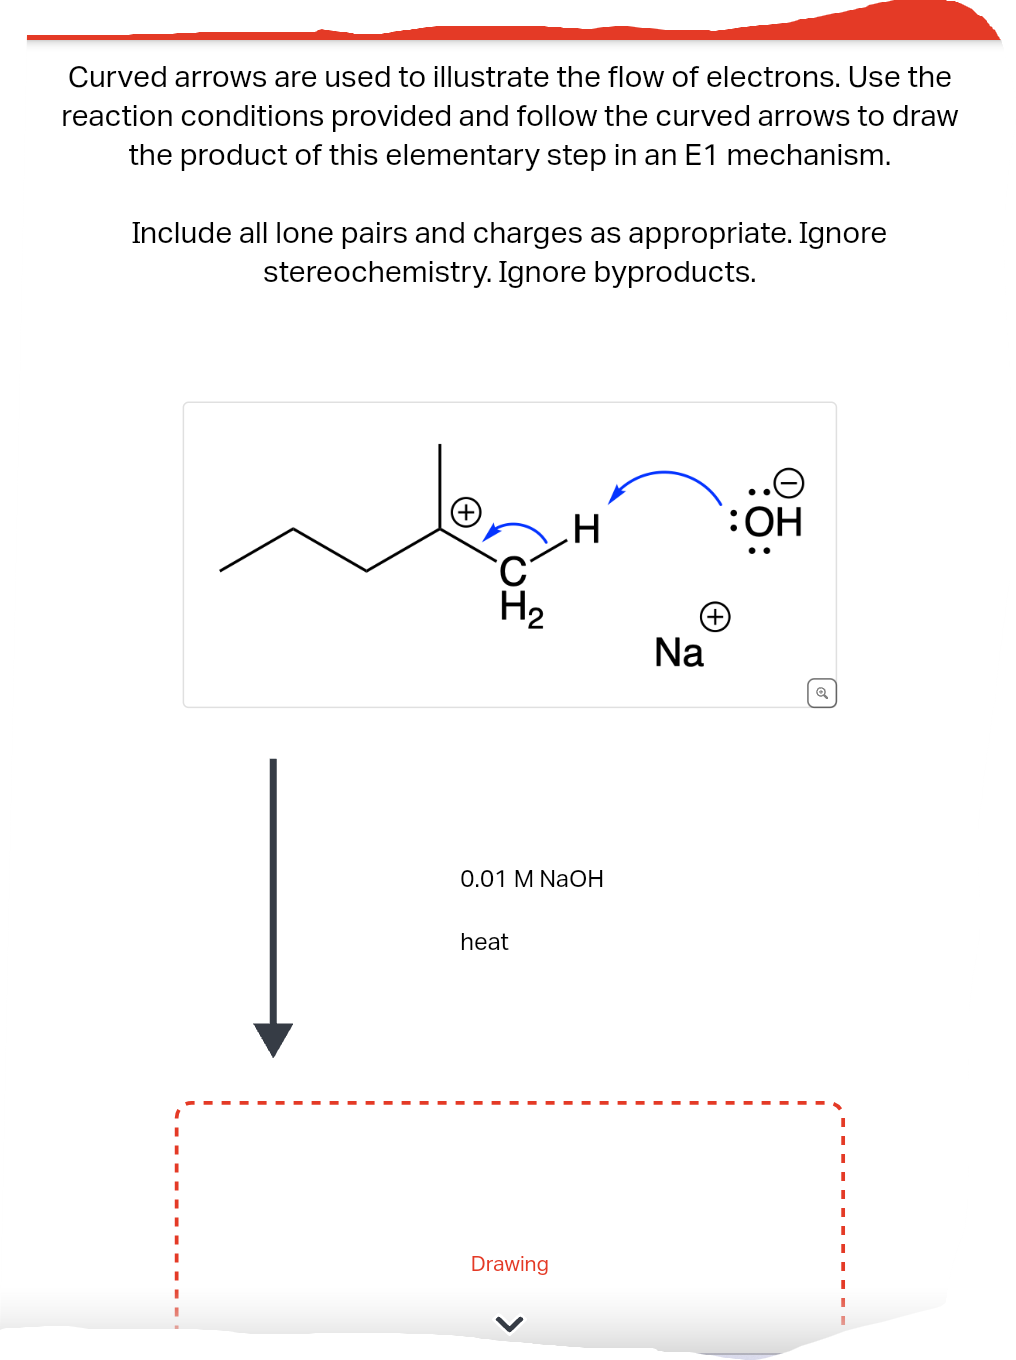 Curved arrows are used to illustrate the flow of electrons. Use the
reaction conditions provided and follow the curved arrows to draw
the product of this elementary step in an E1 mechanism.
Include all lone pairs and charges as appropriate. Ignore
stereochemistry. Ignore byproducts.
H₂
0.01 M NaOH
heat
H
Drawing
Na
OH
Q